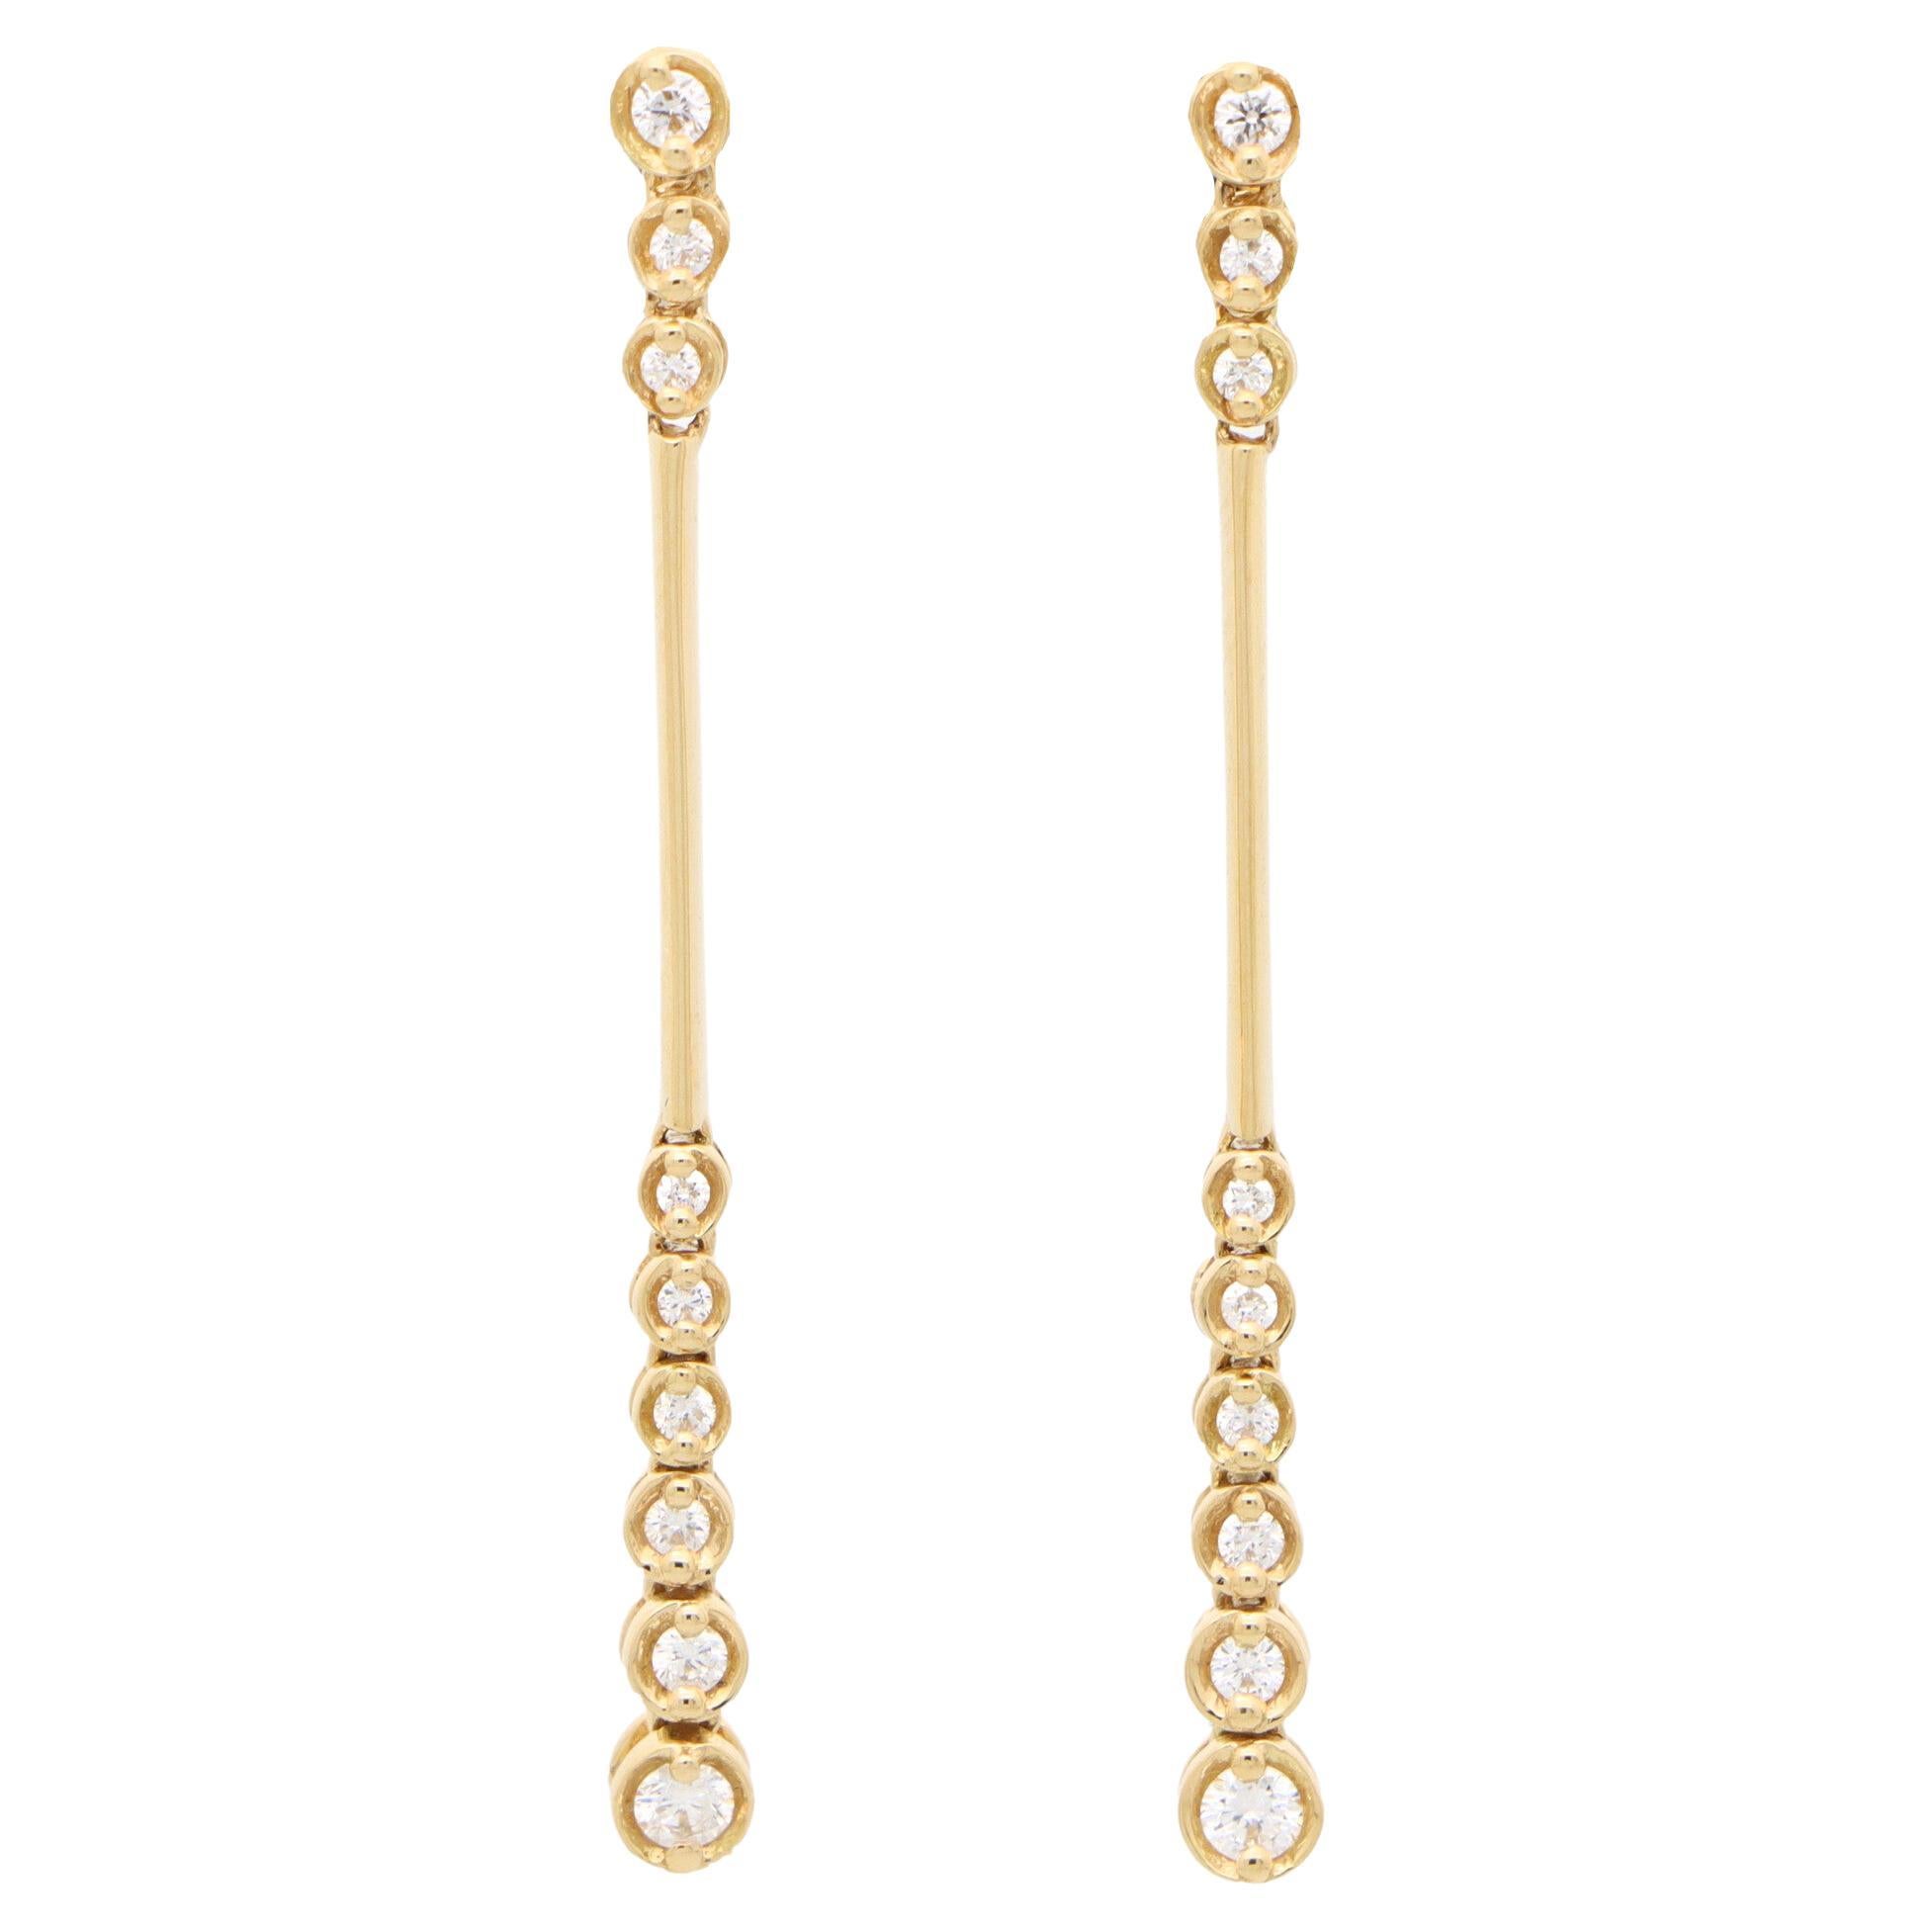 Contemporary Diamond Drop Earring in 18k Yellow Gold